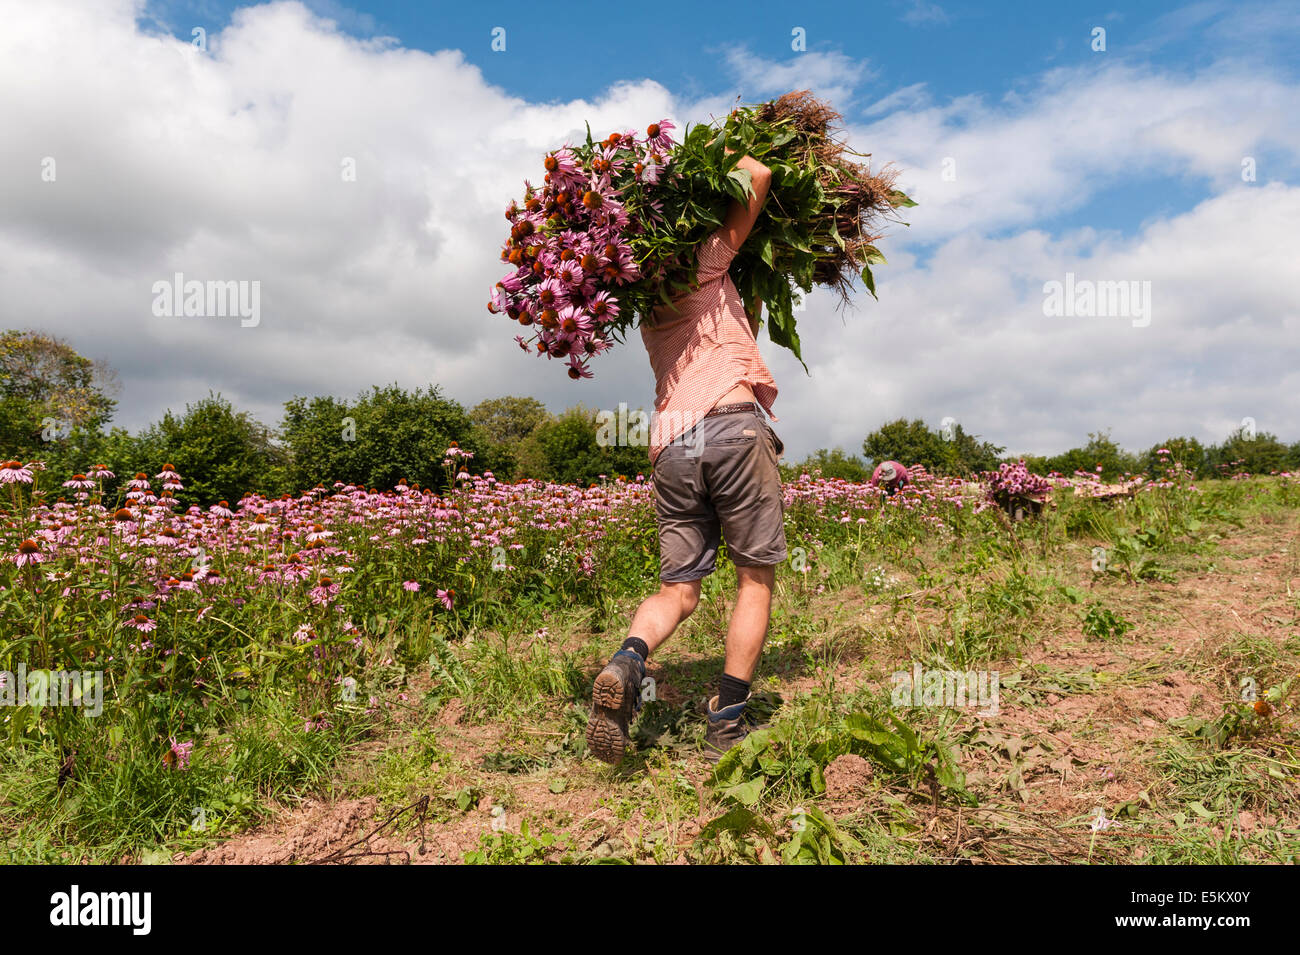 Harvesting echinacea (echinacea angustifolia) at Herbfarmacy, a herb farm in Herefordshire, UK Stock Photo